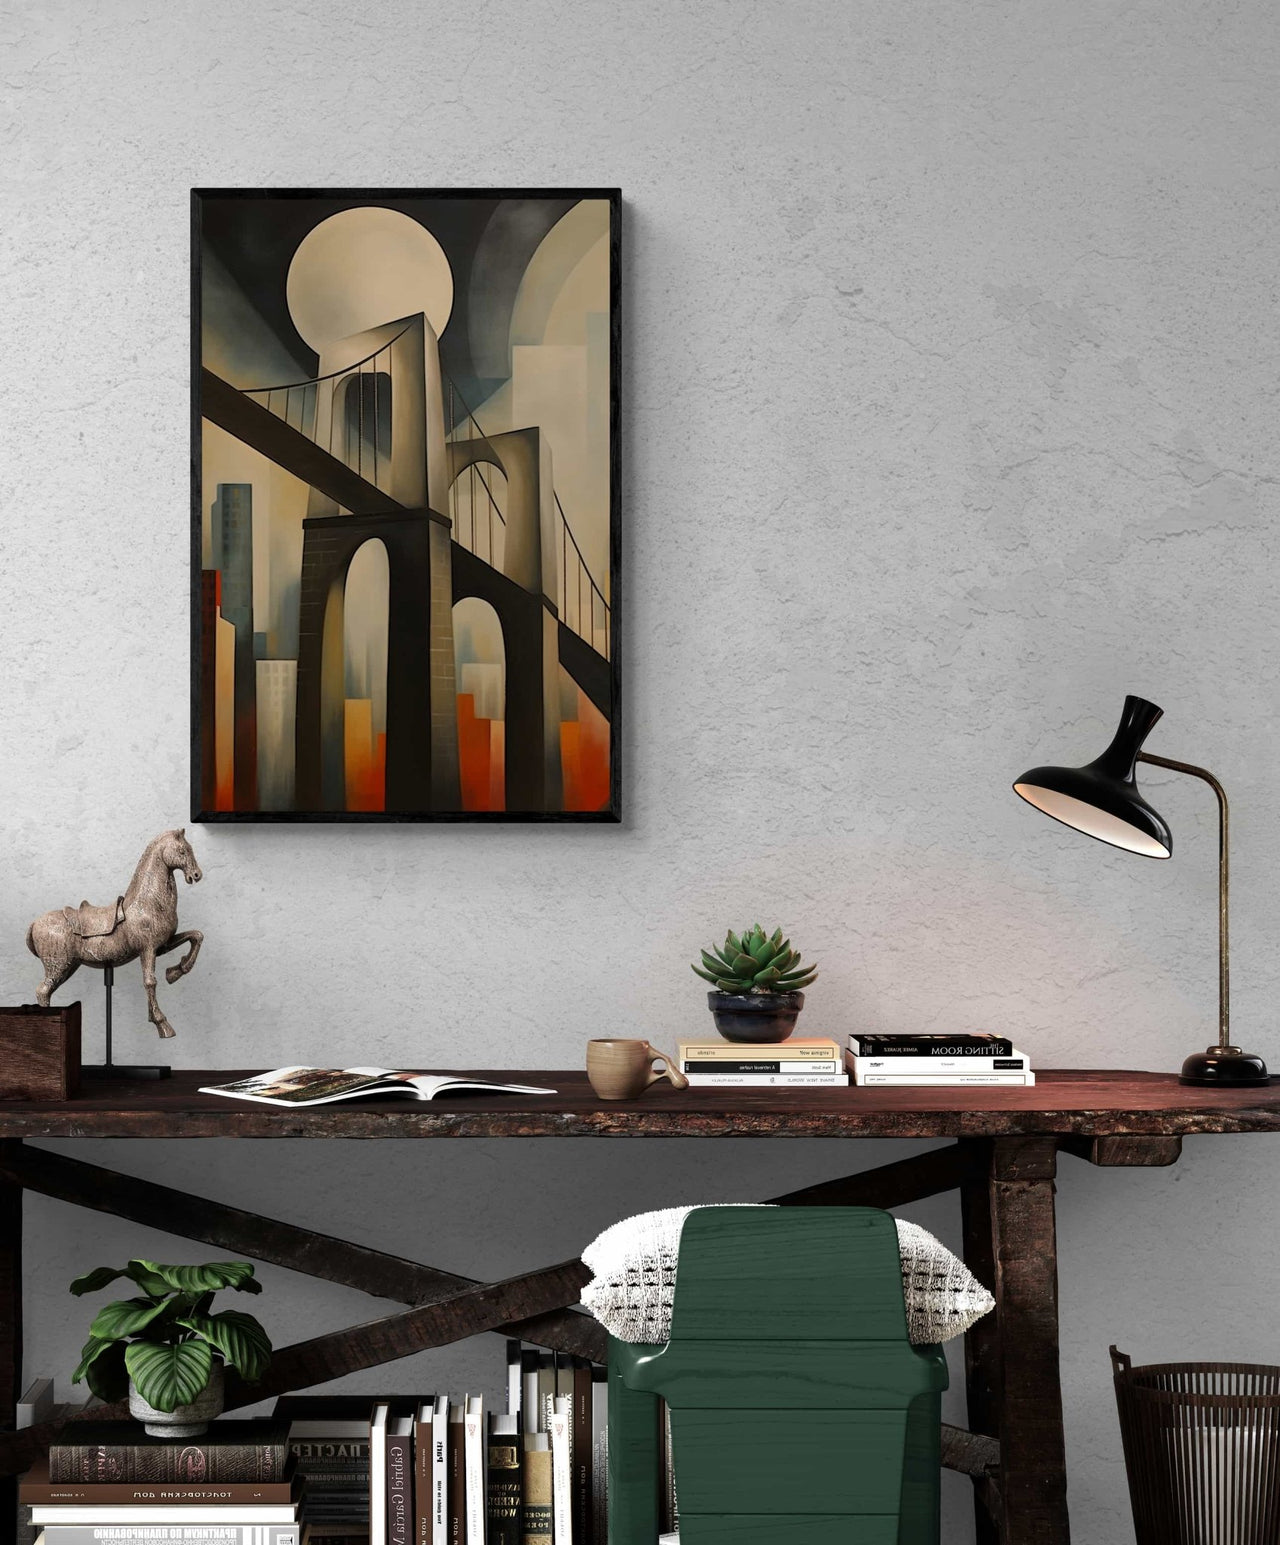 Sleek framed canvas artwork from Milton Wes Art featuring abstract architectural elements and muted tones, creating a sophisticated atmosphere in a stylishly decorated workspace, available at miltonwesart.com, Harlem NYC.